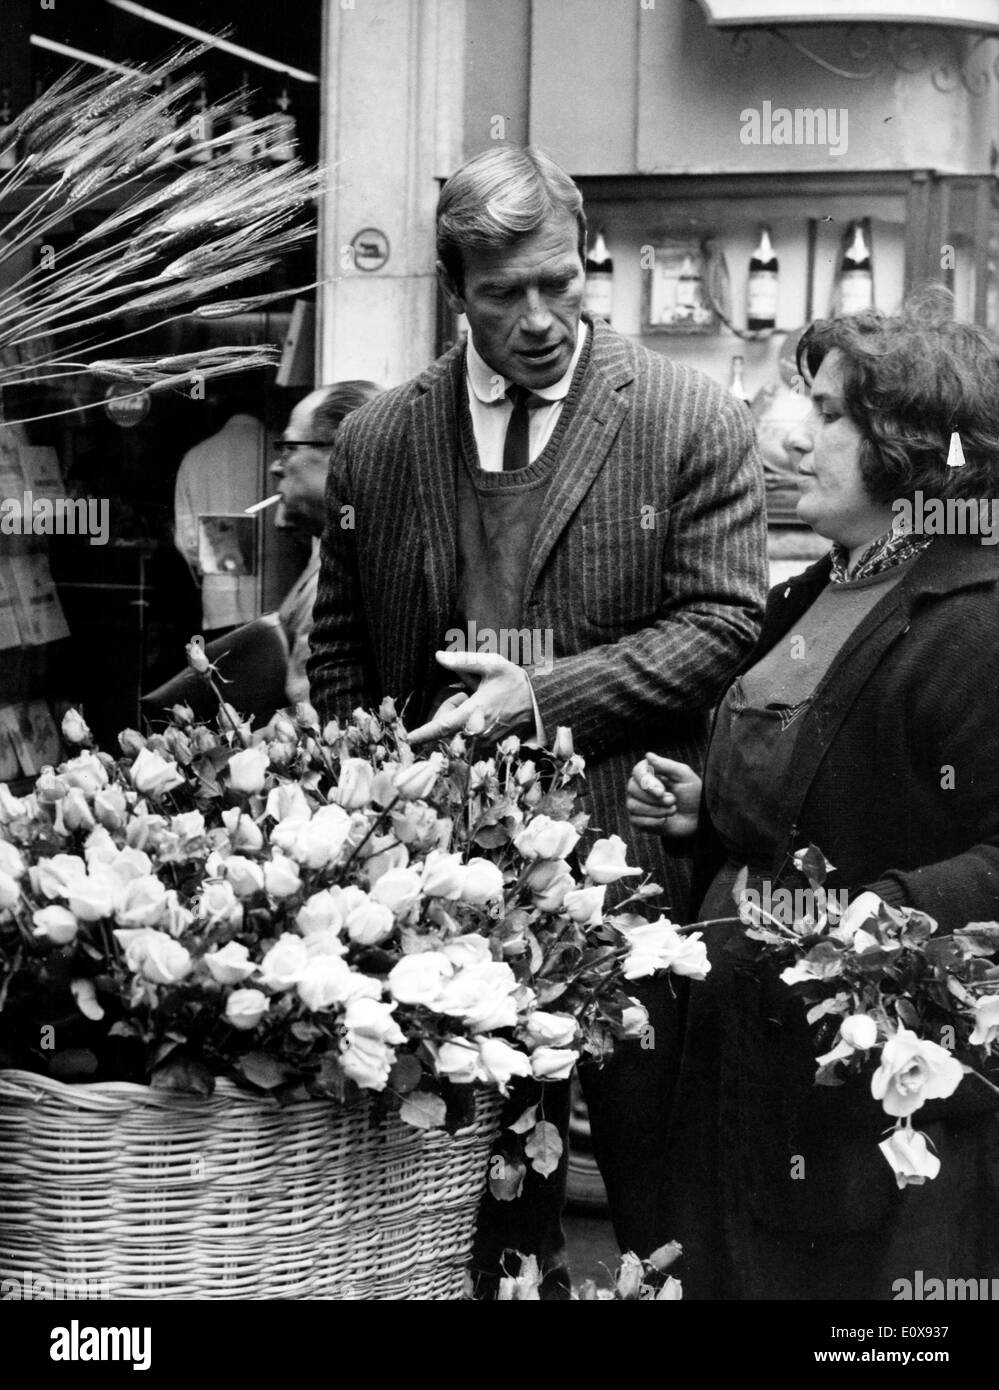 B-movie actor KEN CLARK buying flowers on the Spanish Steps Stock Photo